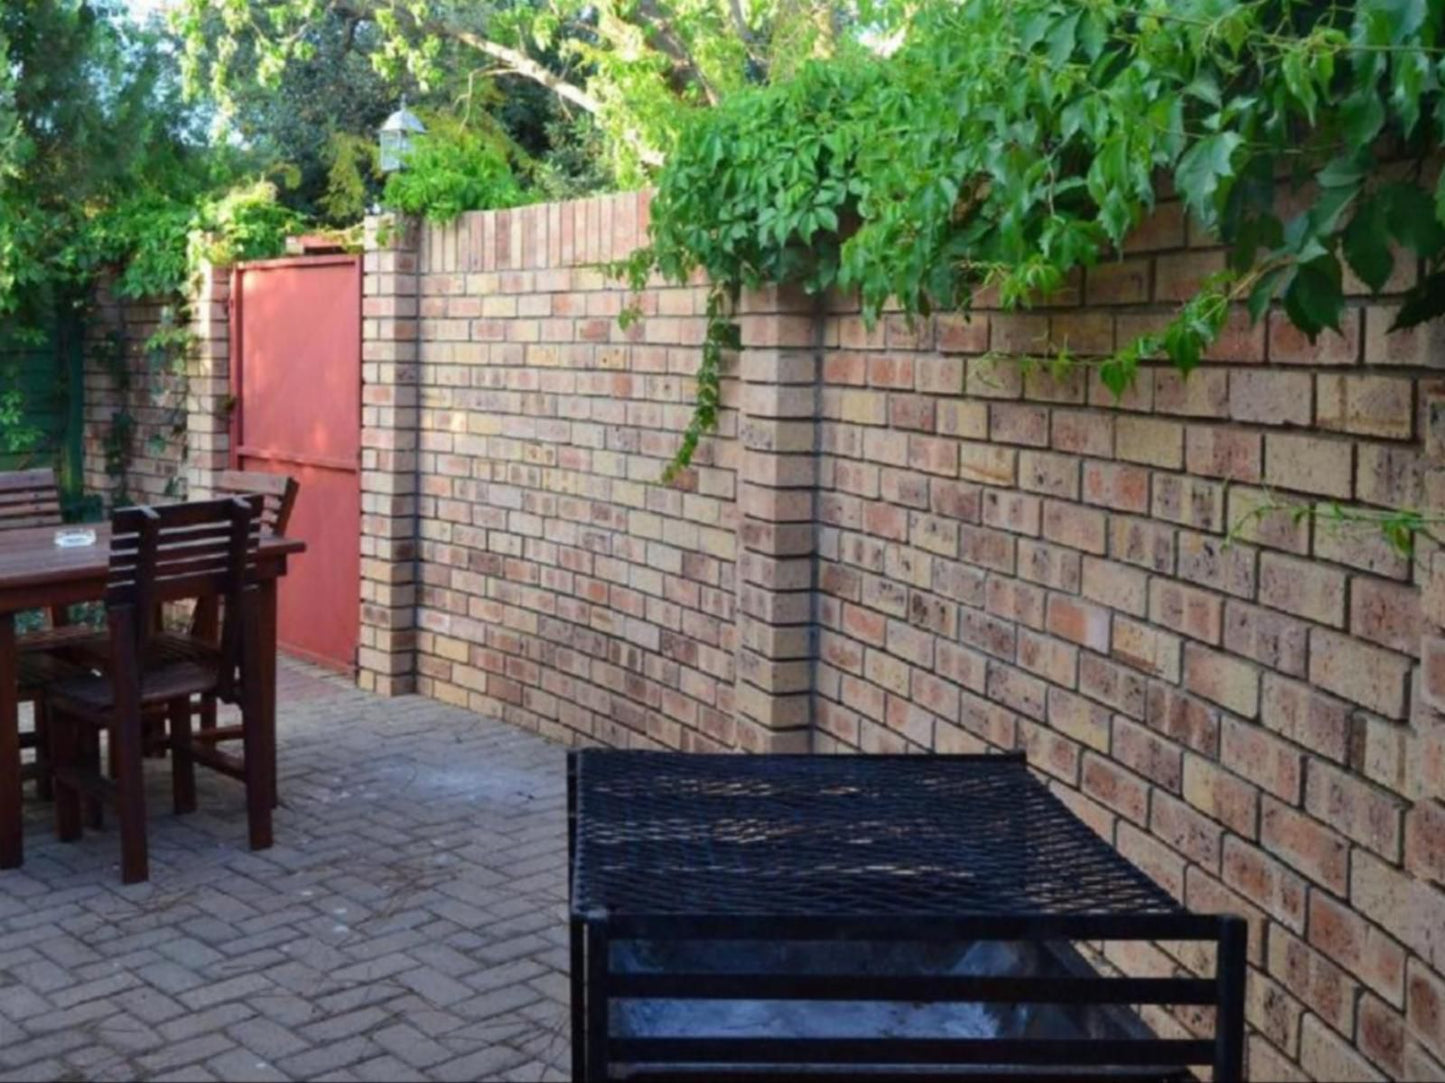 Hadida Guest House Kimberley Northern Cape South Africa Brick Texture, Texture, Garden, Nature, Plant